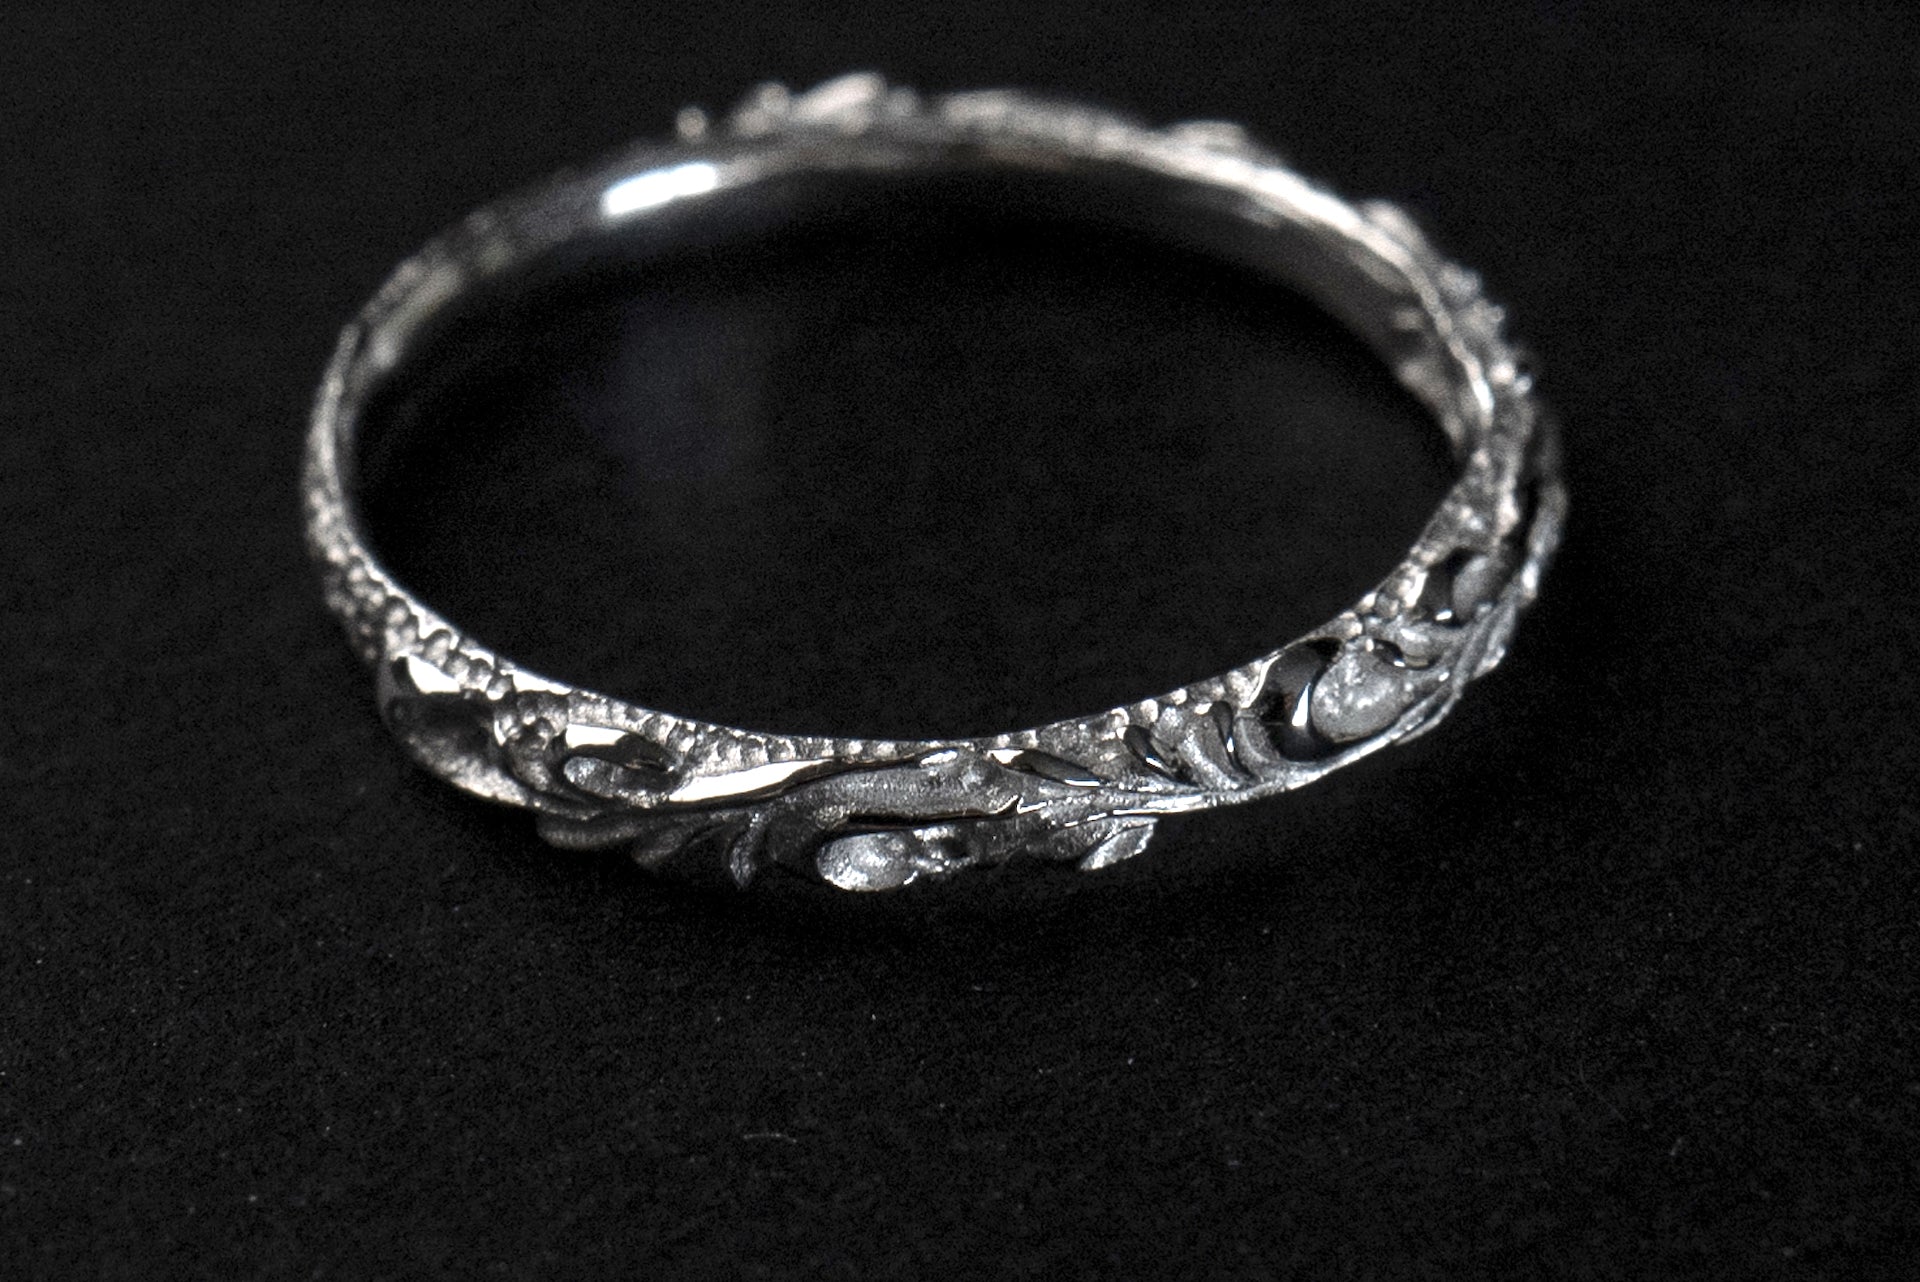 Legend Extra Small "Flora" Silver Ring